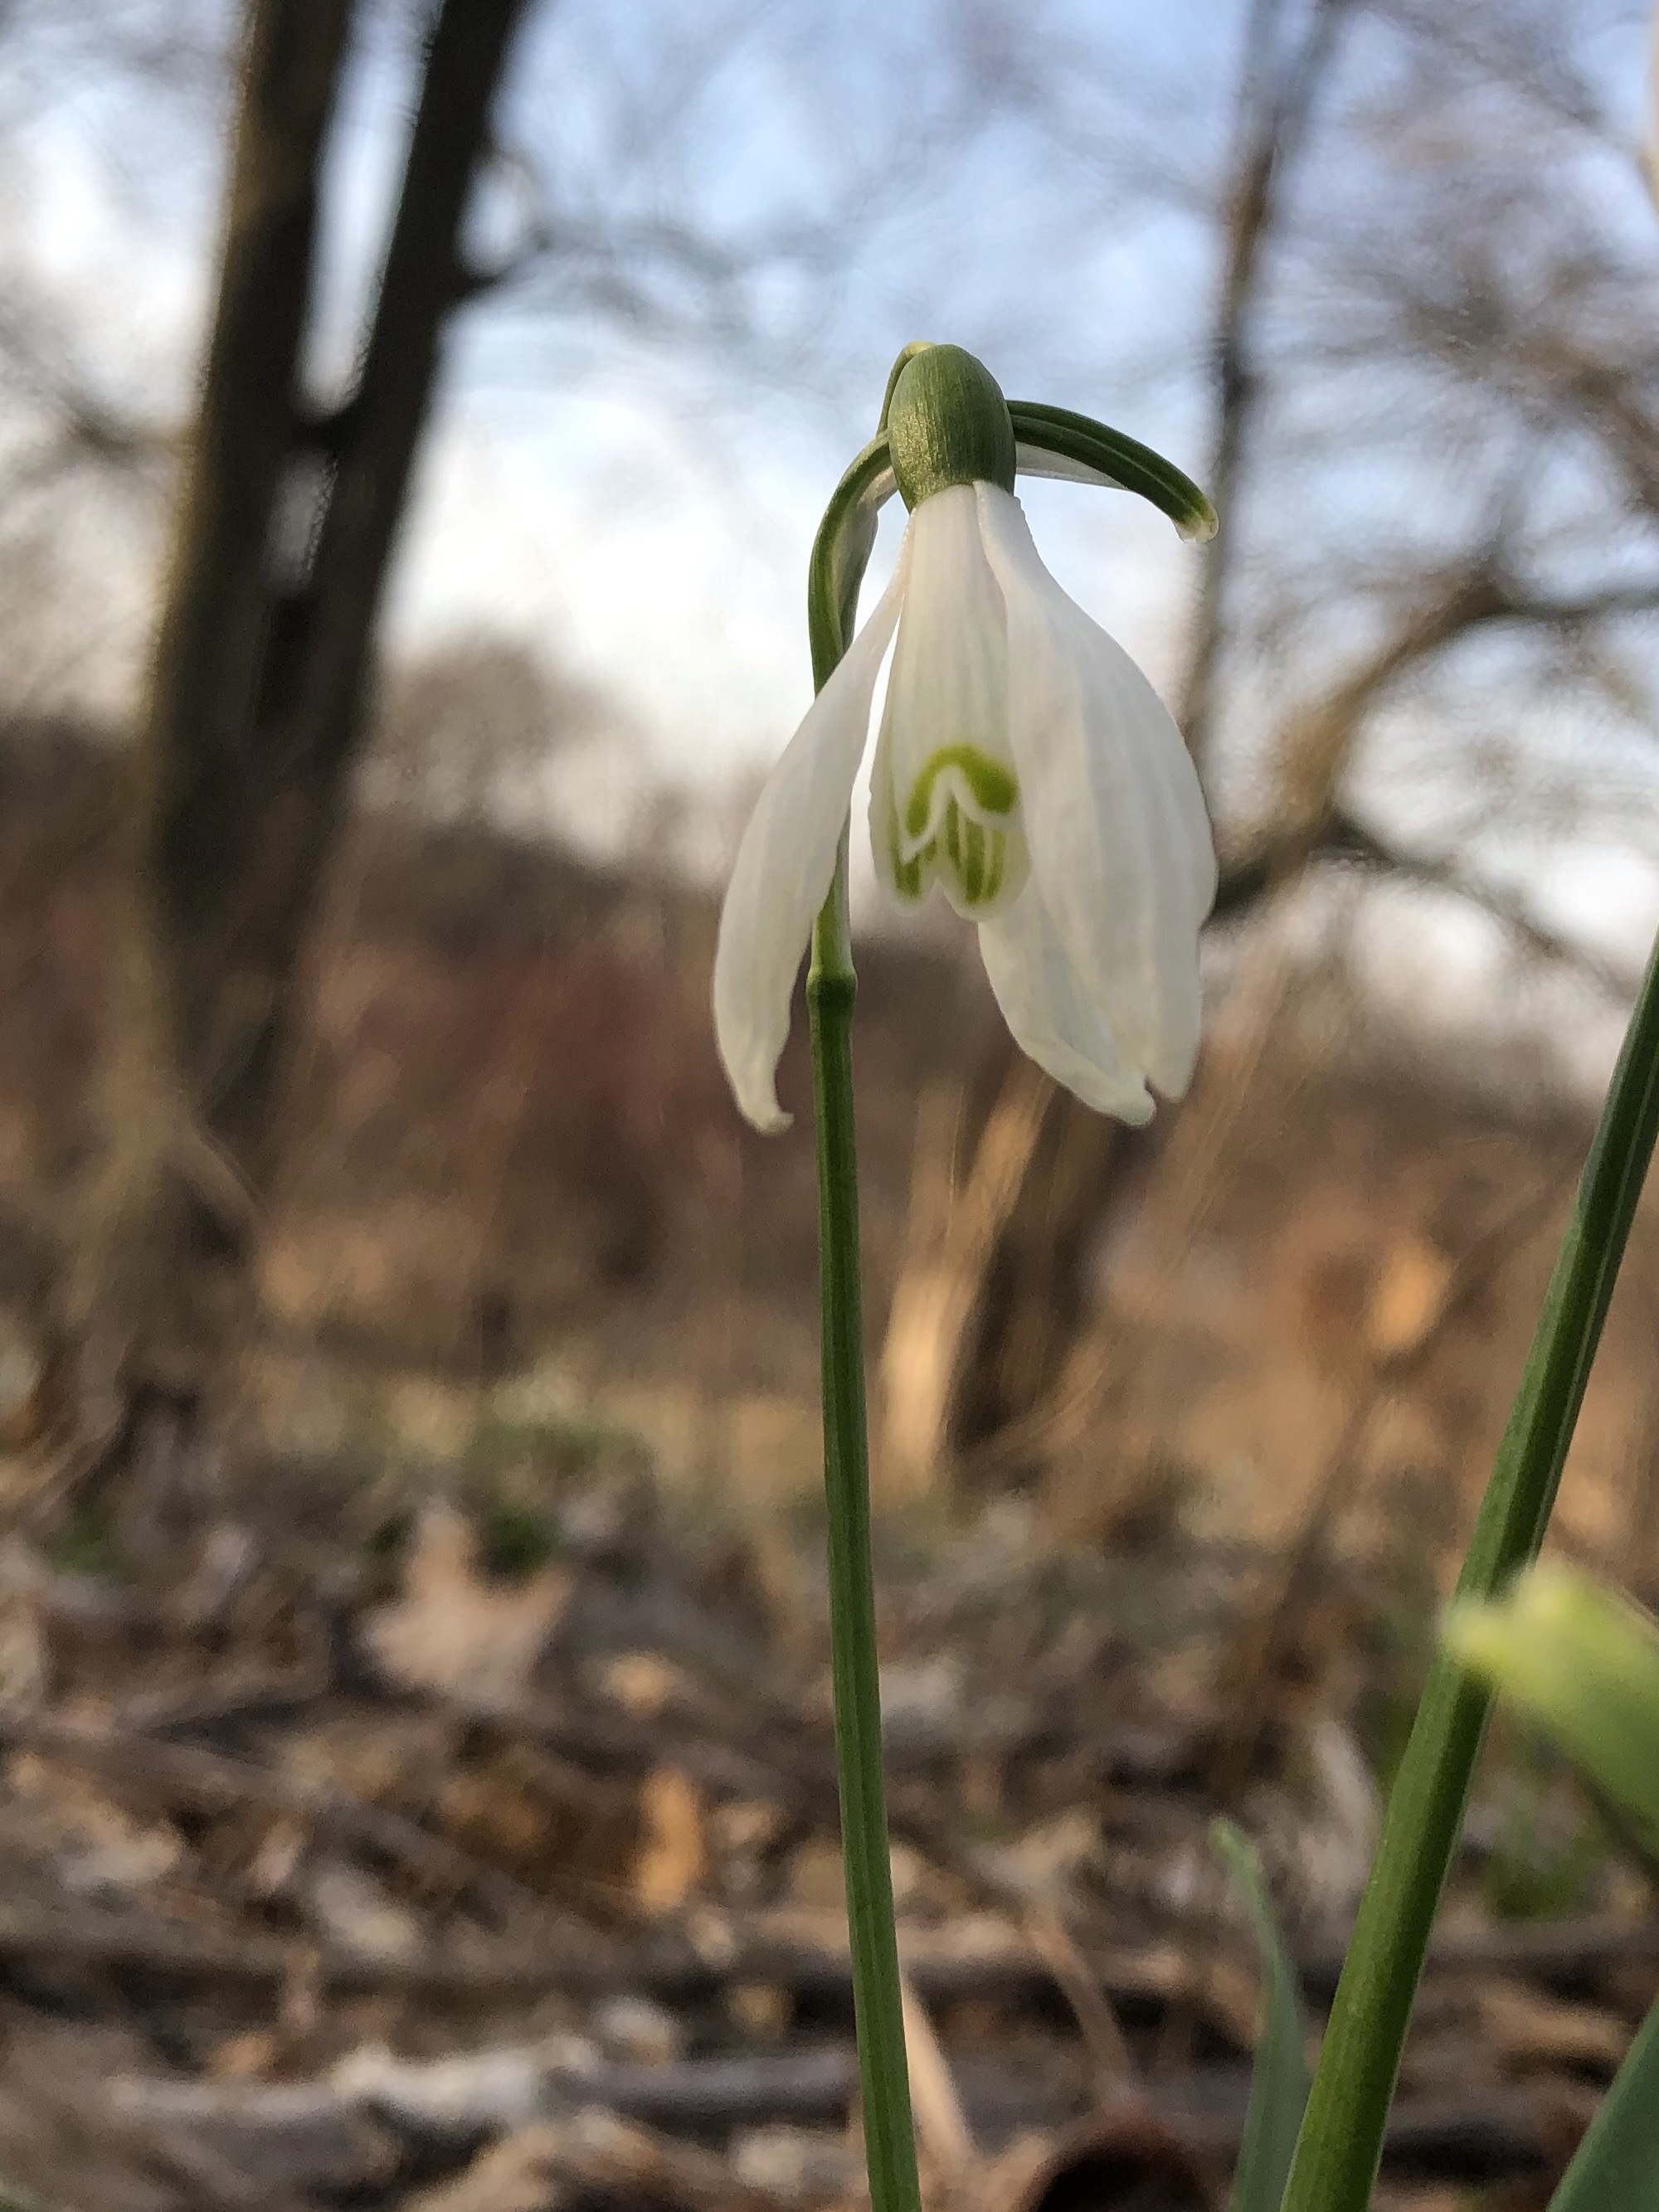 Snowdrop in Madison Wisconsin along Arbor Drive on March 30, 2021.